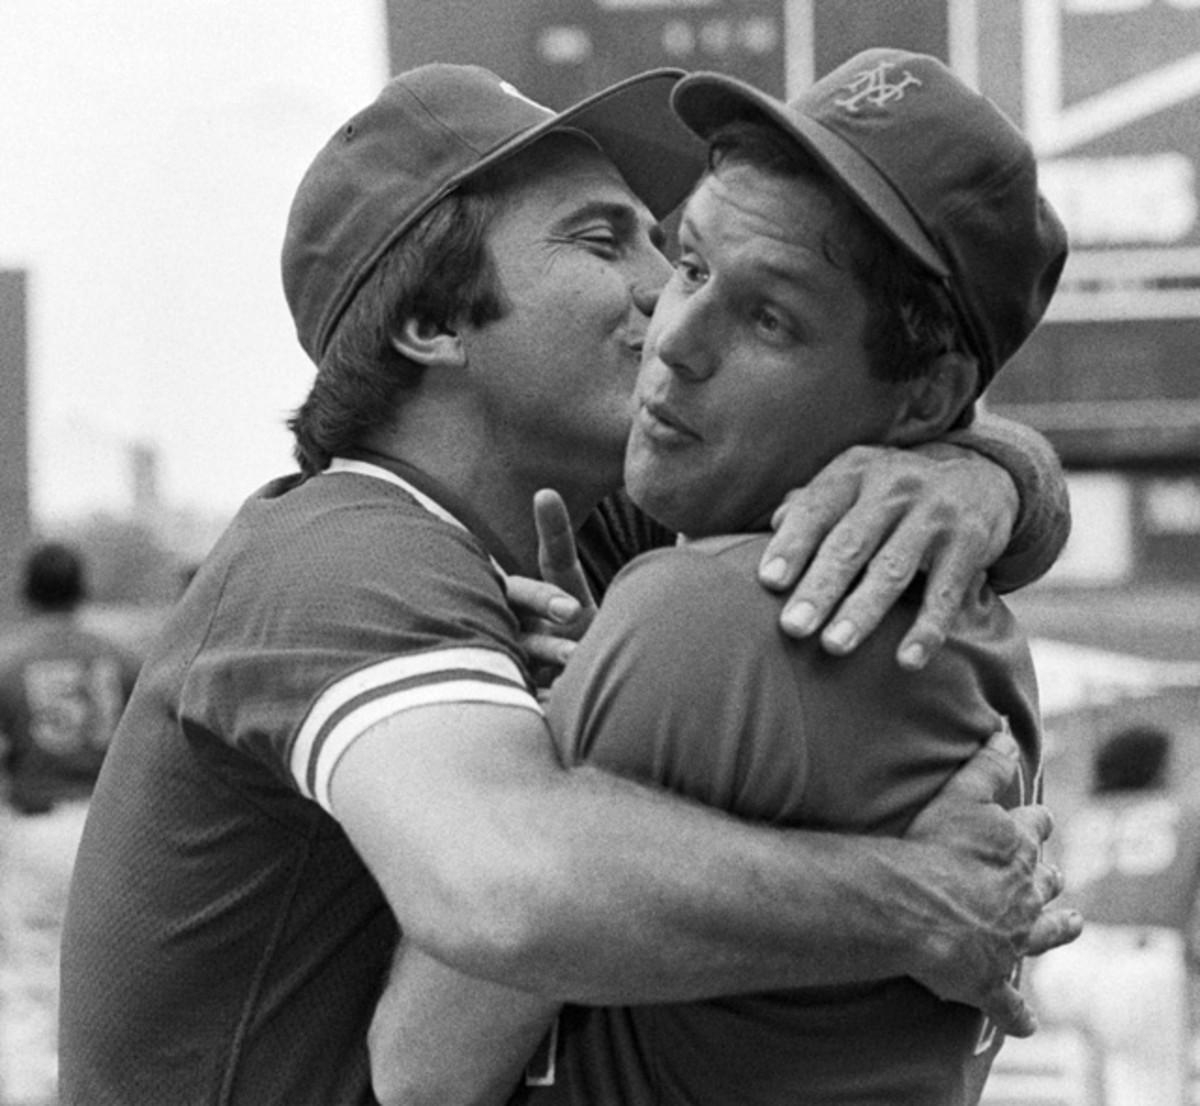 Tom Seaver and Johnny Bench 